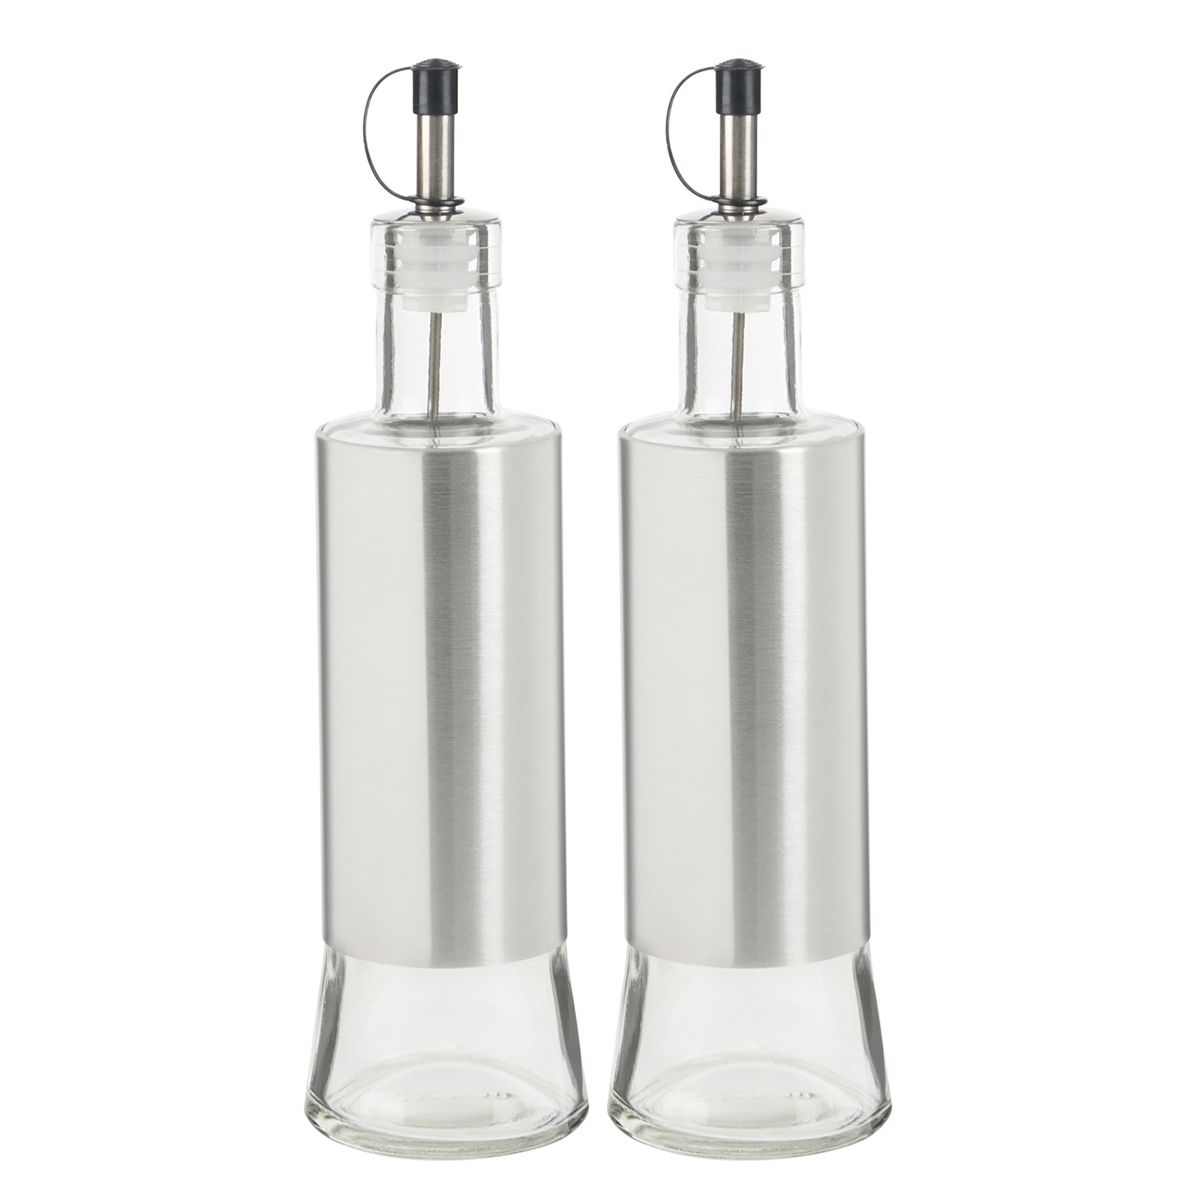 Oil Bottles Set of 2 | The Container Store